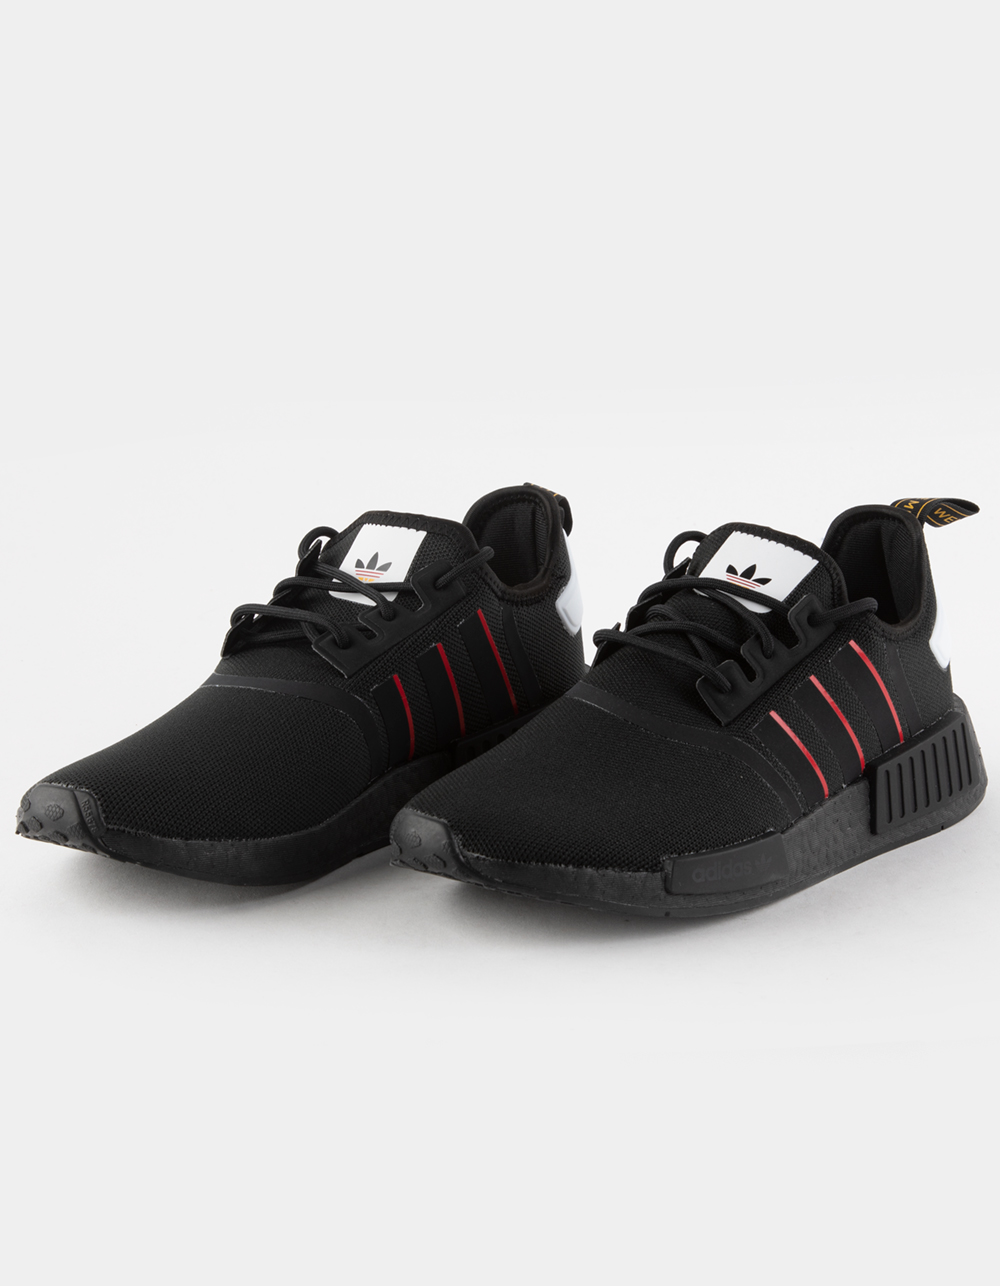 ADIDAS NMD_R1 Mens Shoes - BLK/RED | Tillys